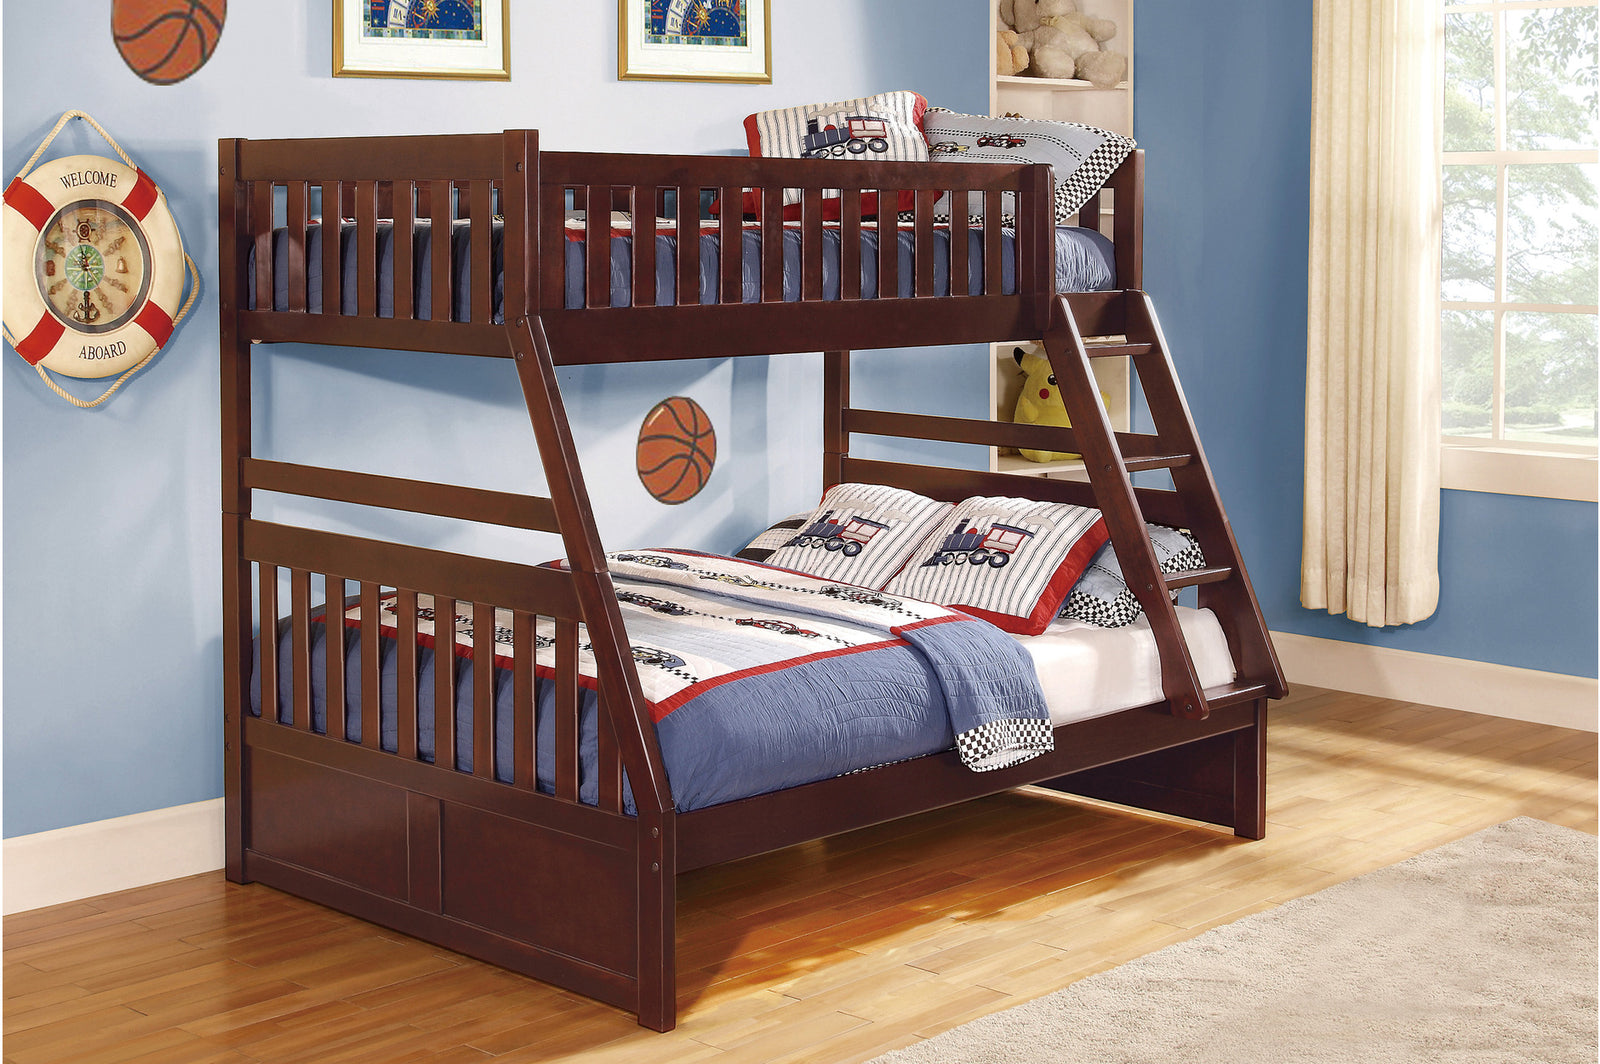 Rowe Dark Cherry Modern Contemporary Transitional Solid Wood With Trundle Youth Bedroom Set